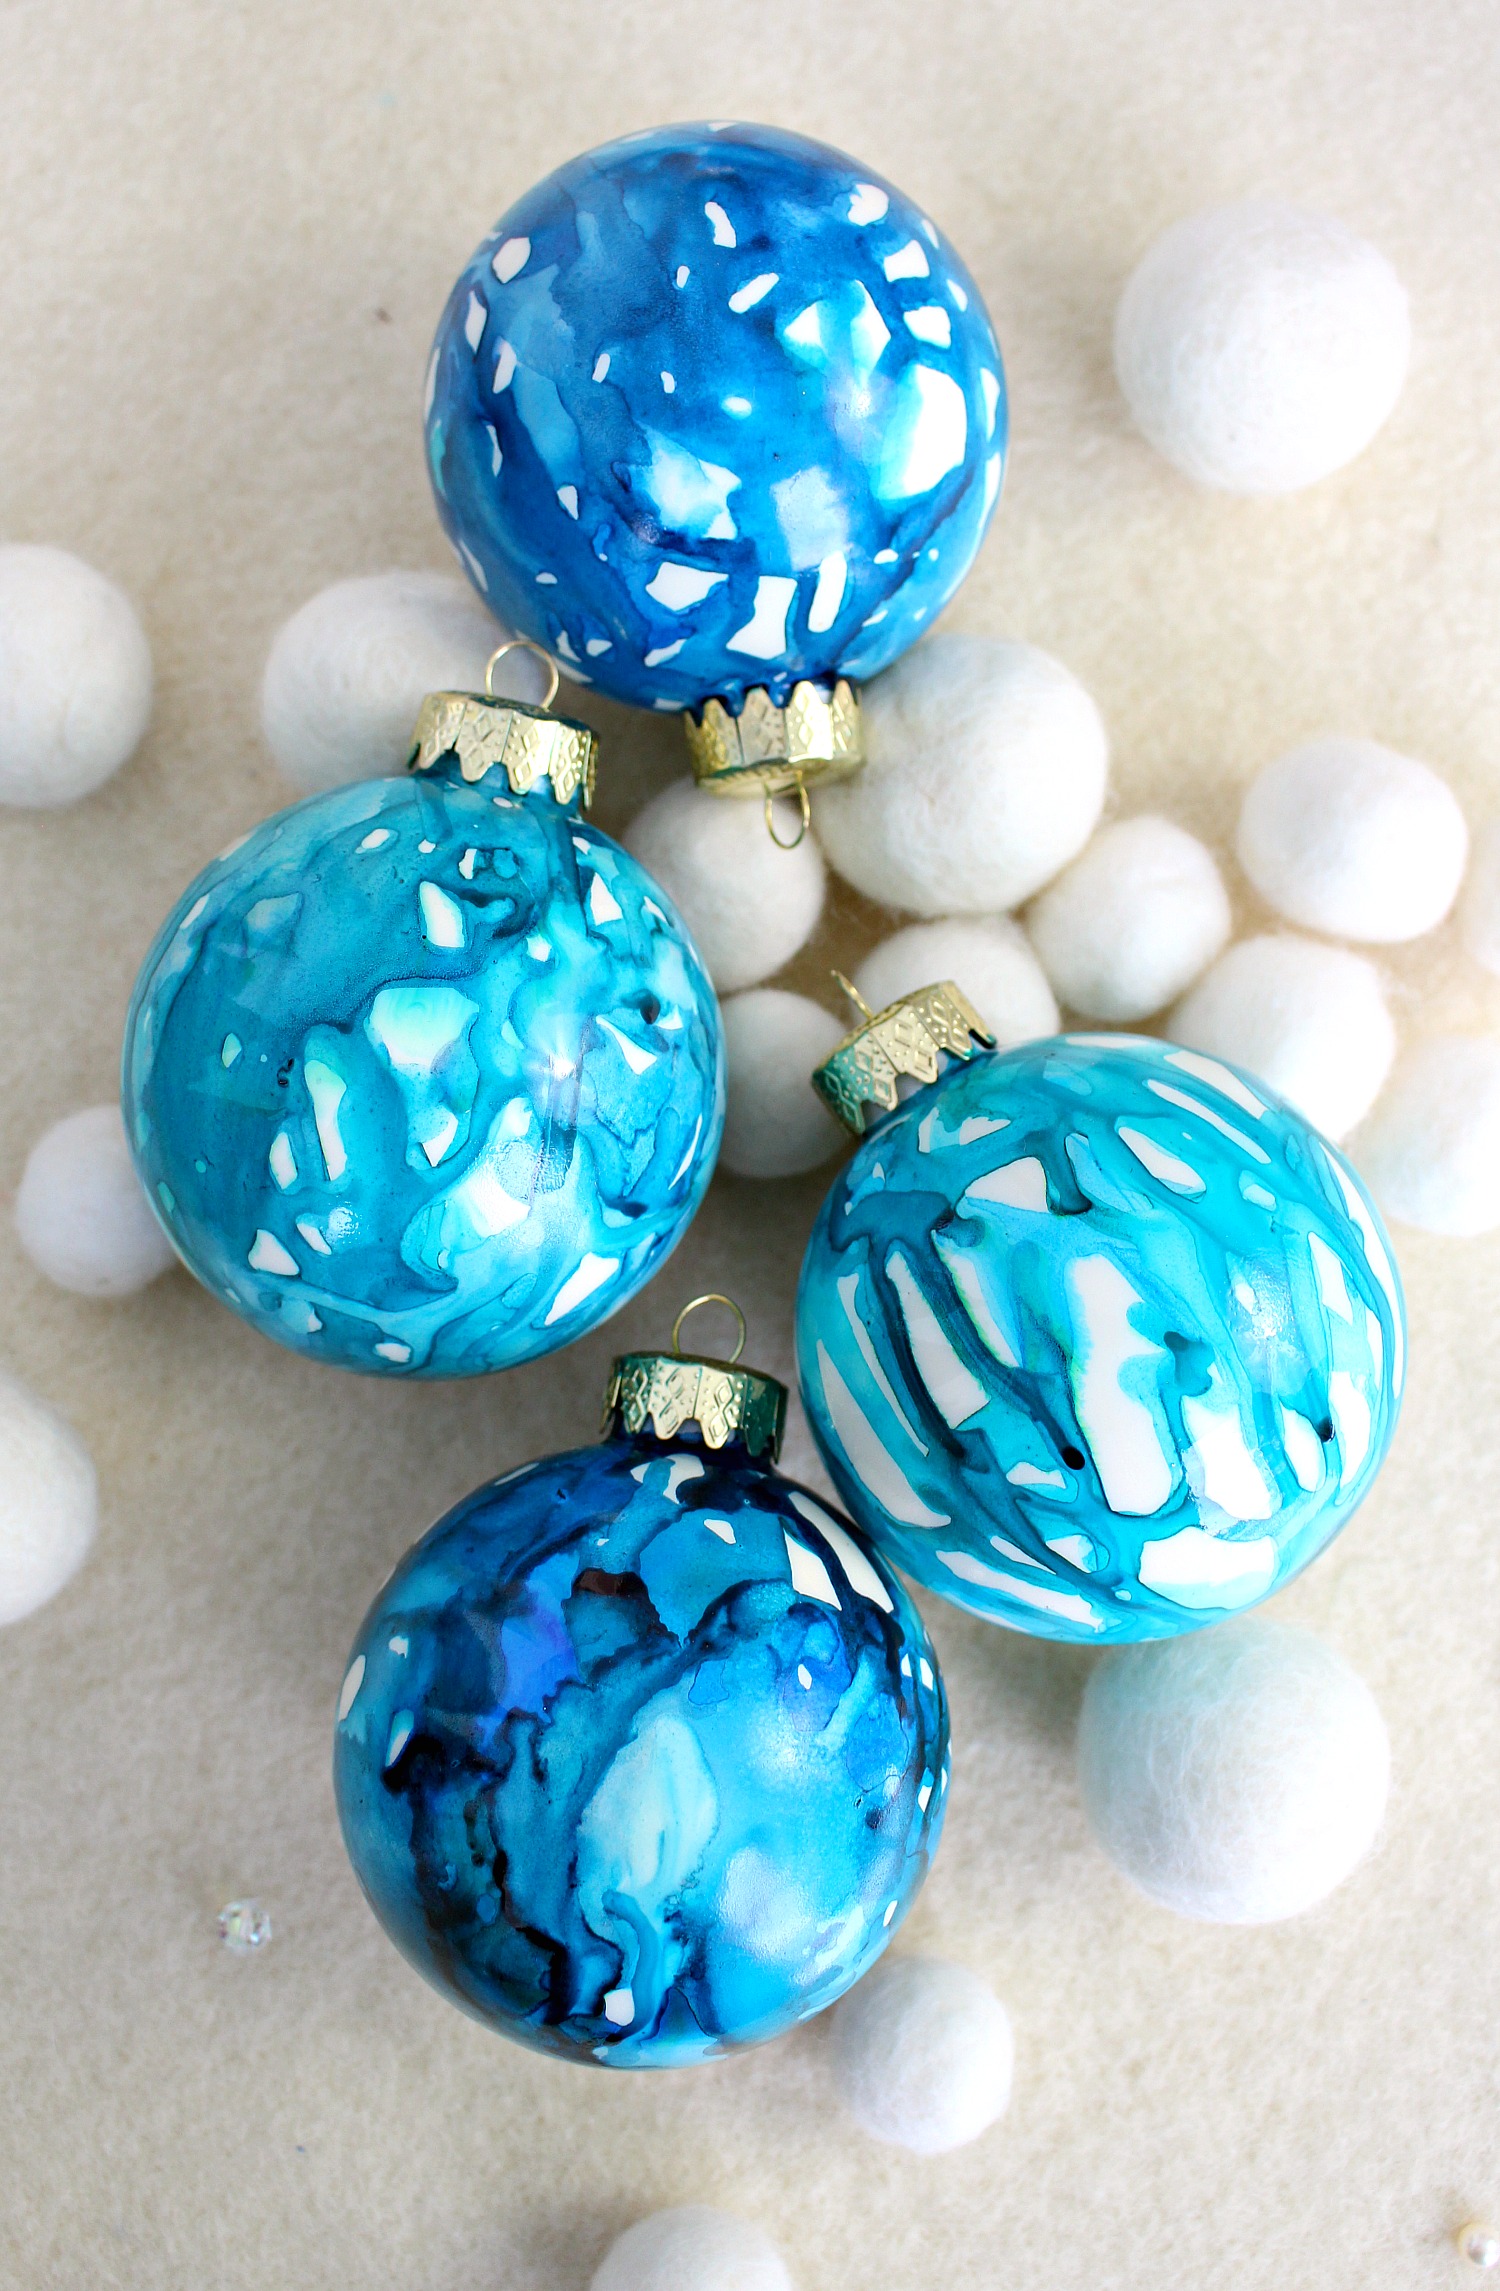 How to Paint on Glass Ornaments